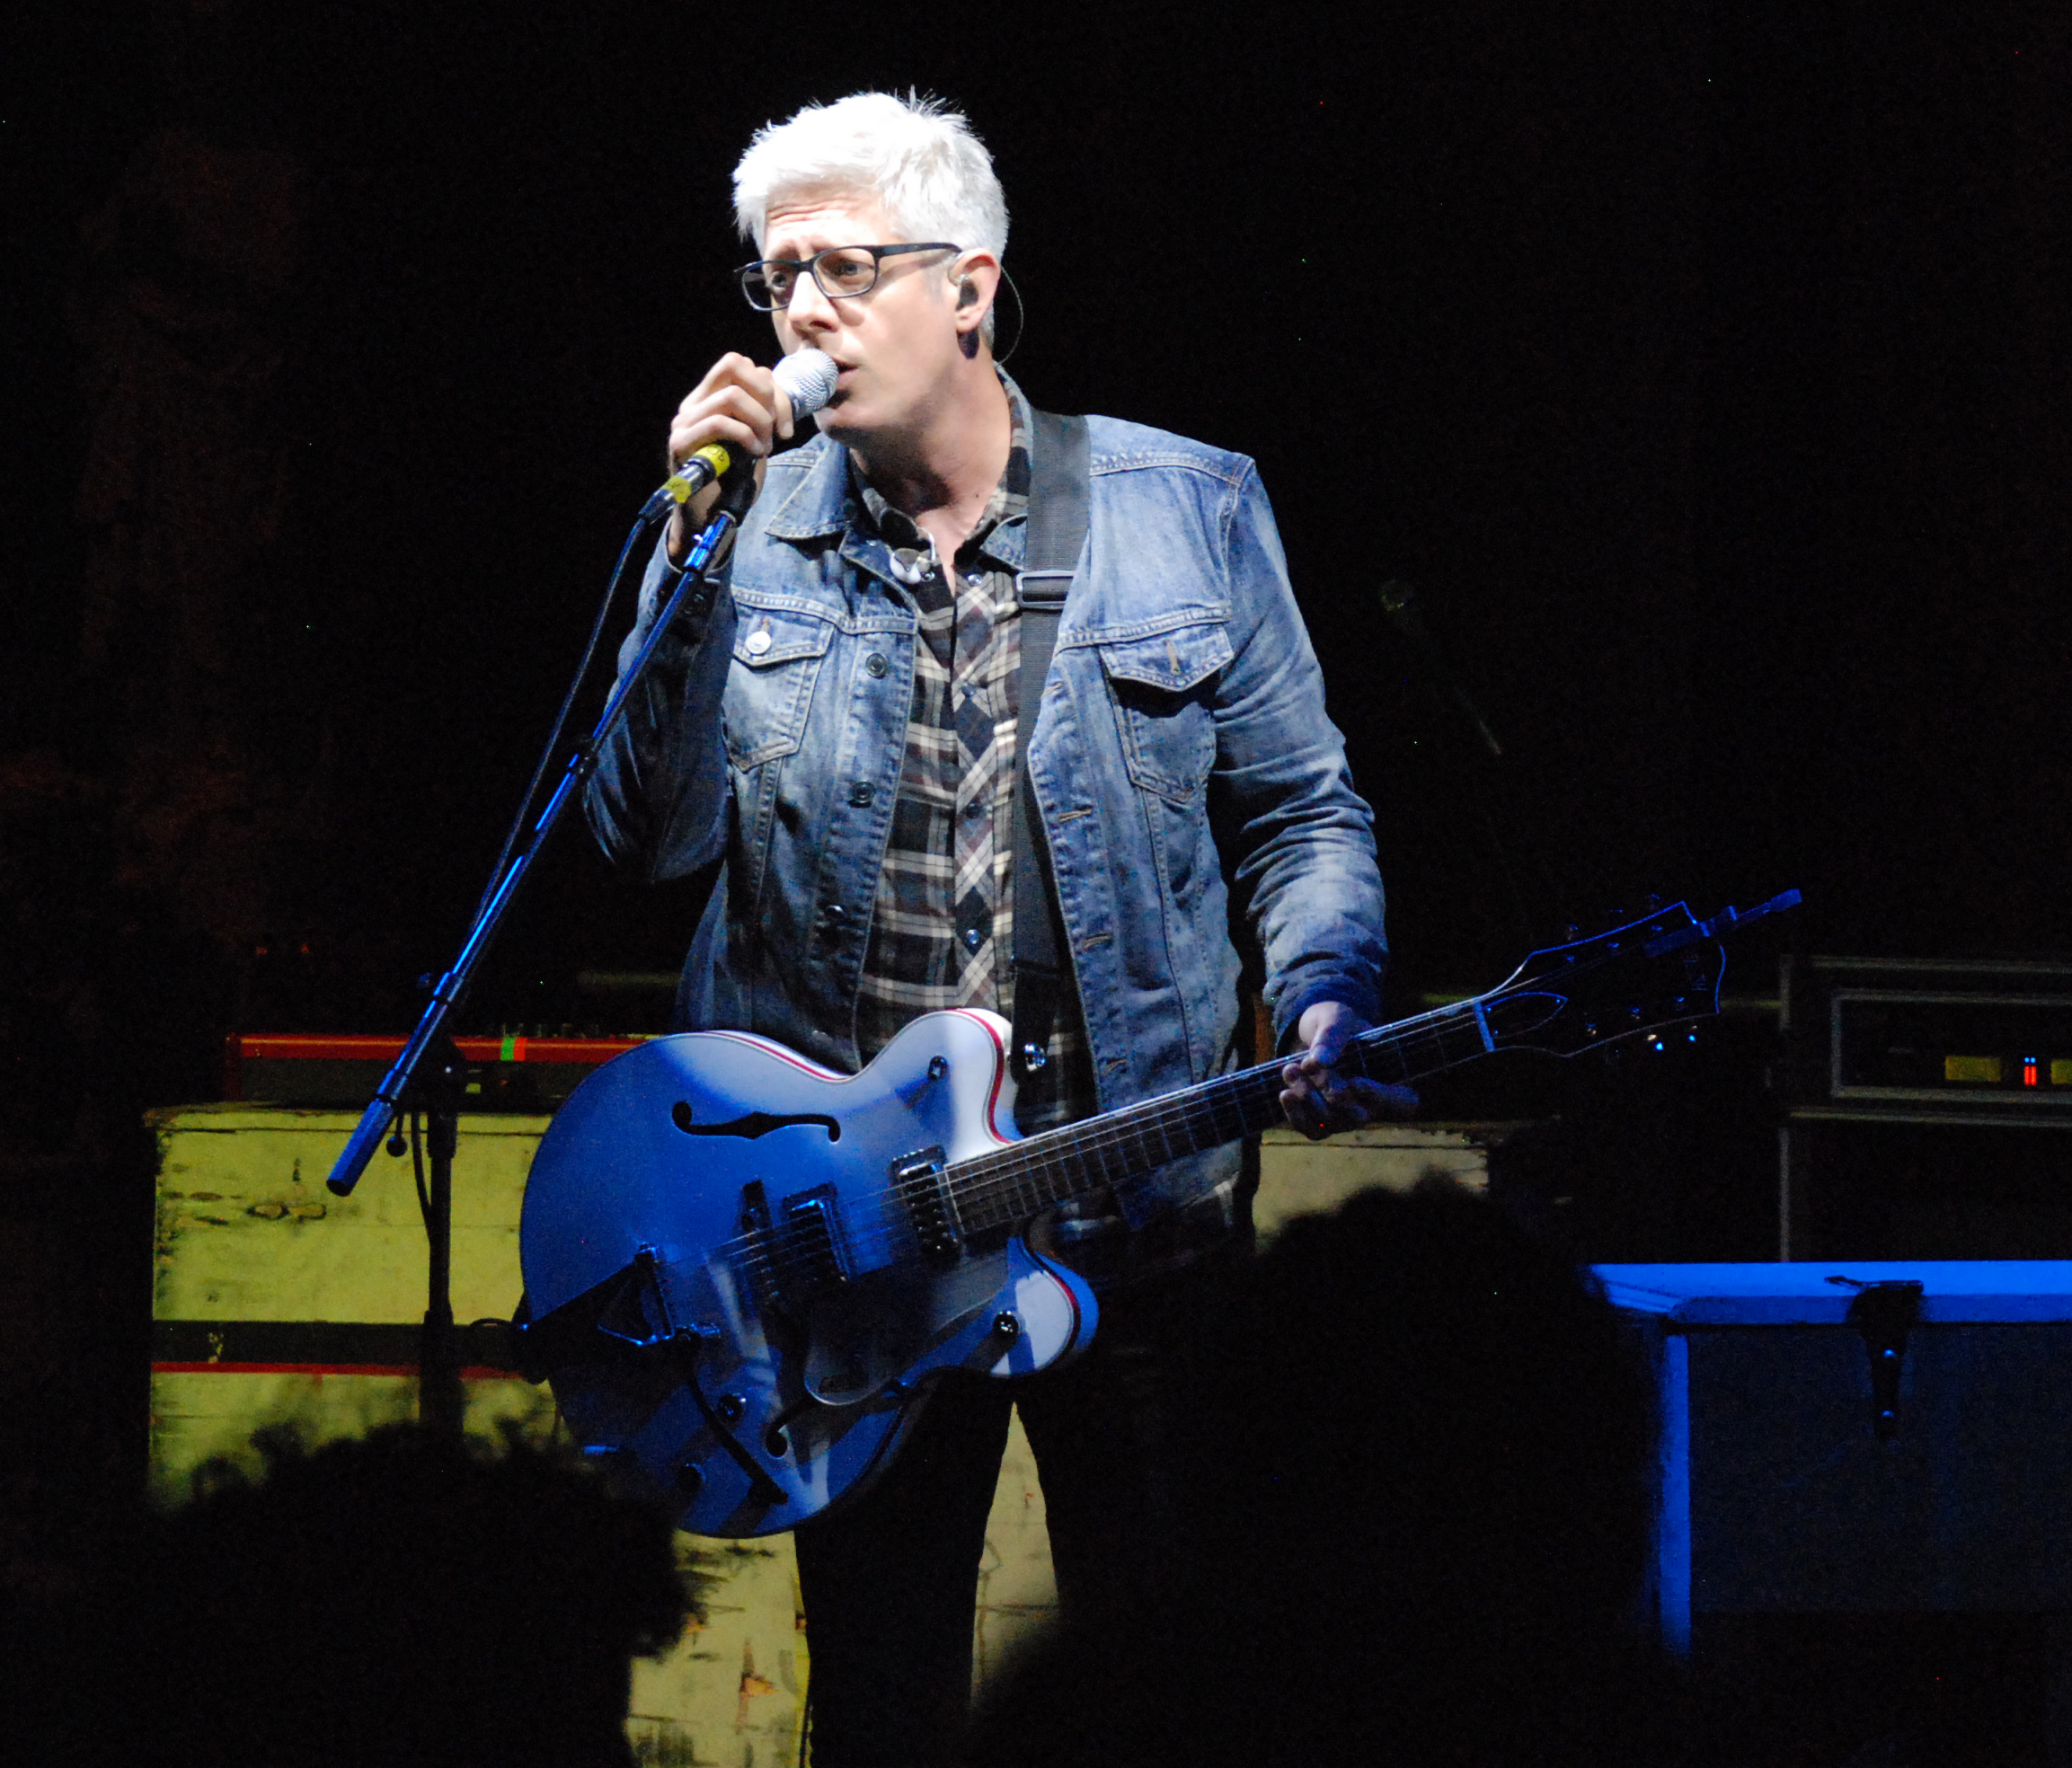 Matt Maher - Your Love Defends Me Story Behind the Song 